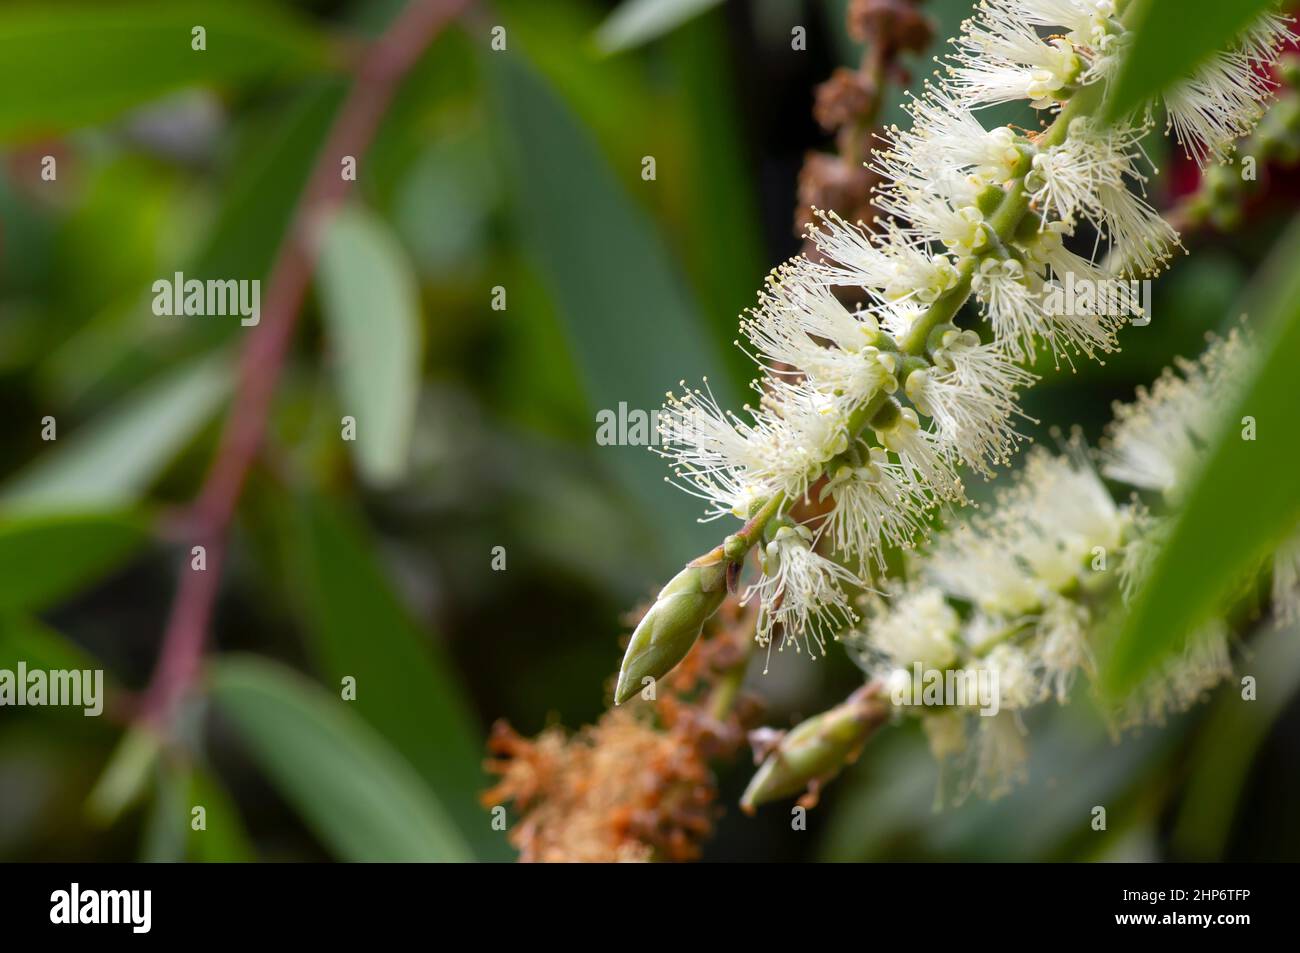 Melaleuca cajuputi flowers, in shallow focus, with blurred background Stock Photo